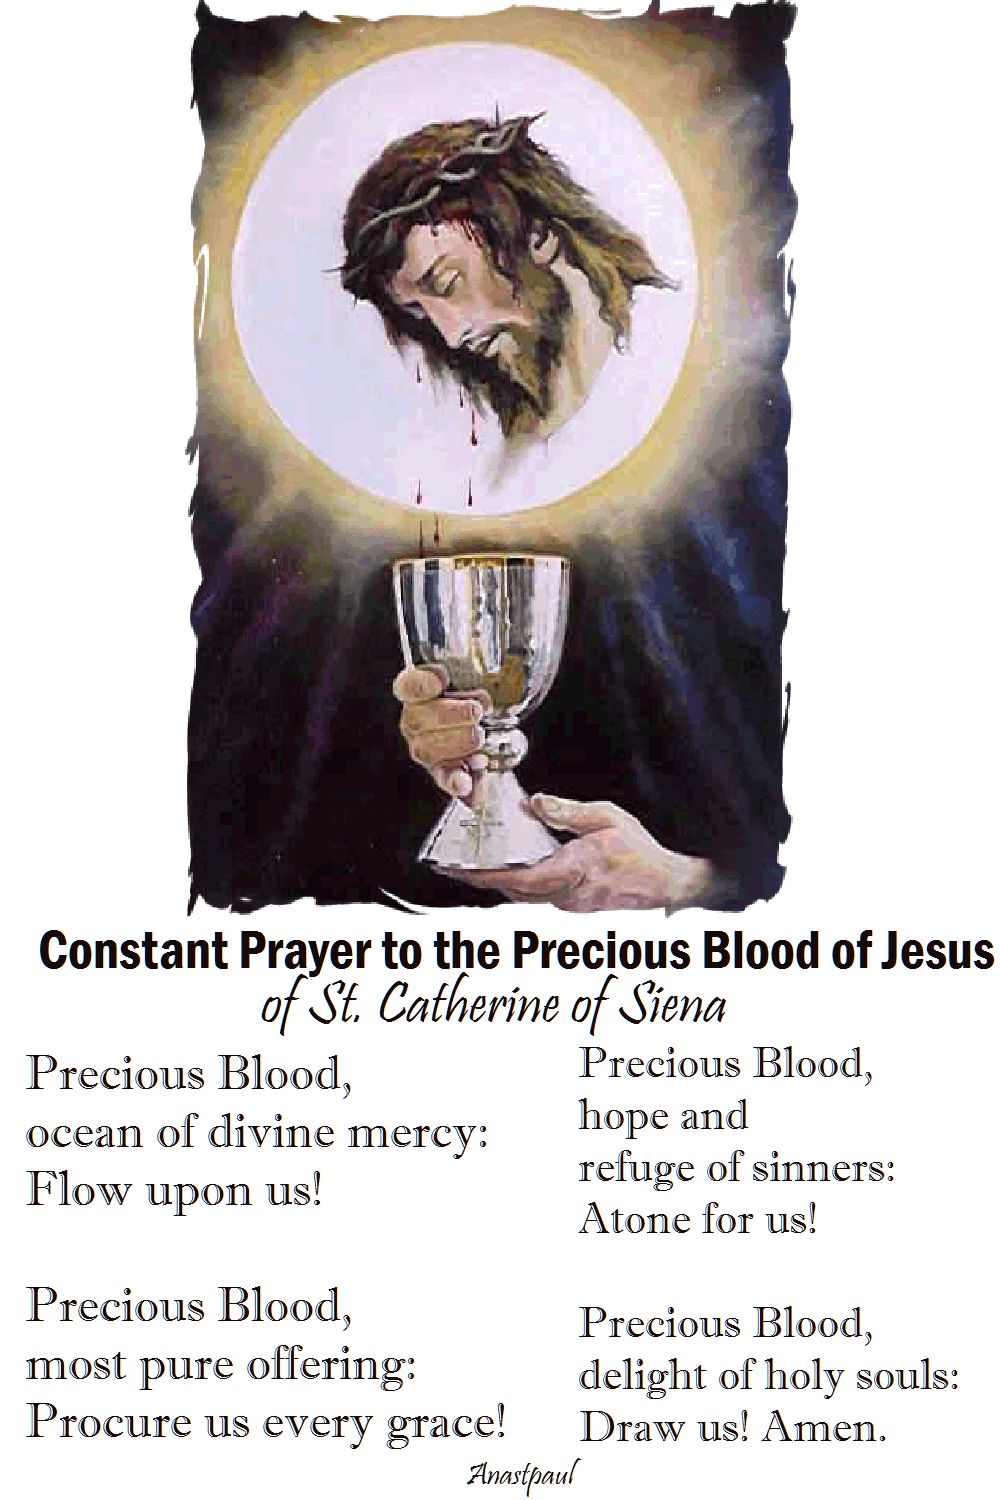 Constant prayer to the precious blood of jesus by st catherine of siena